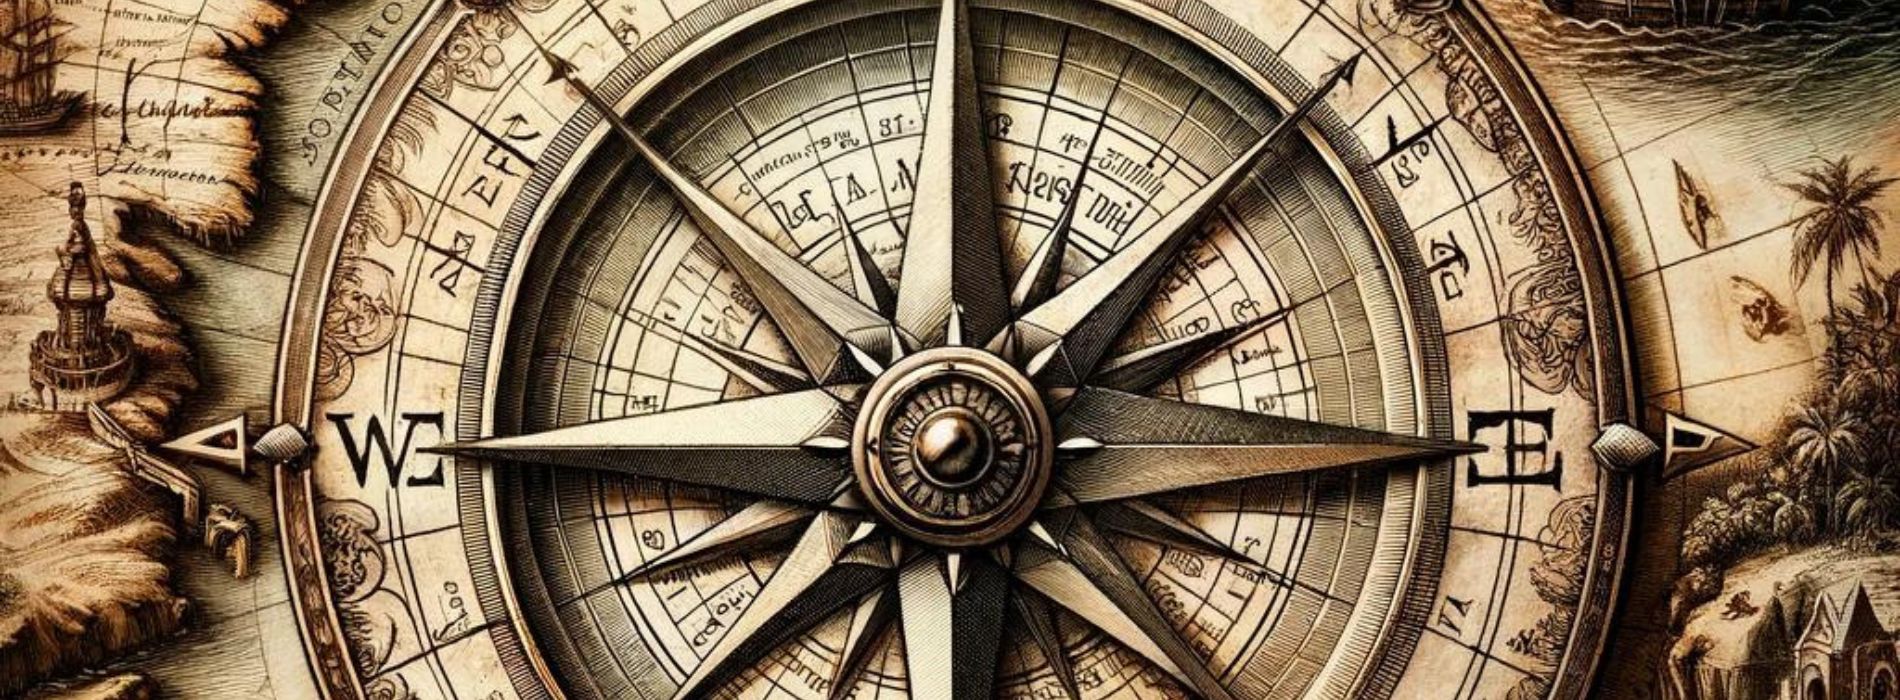 An-Intricate-Compass-Rose-Engraved-on-an-Antique-Map